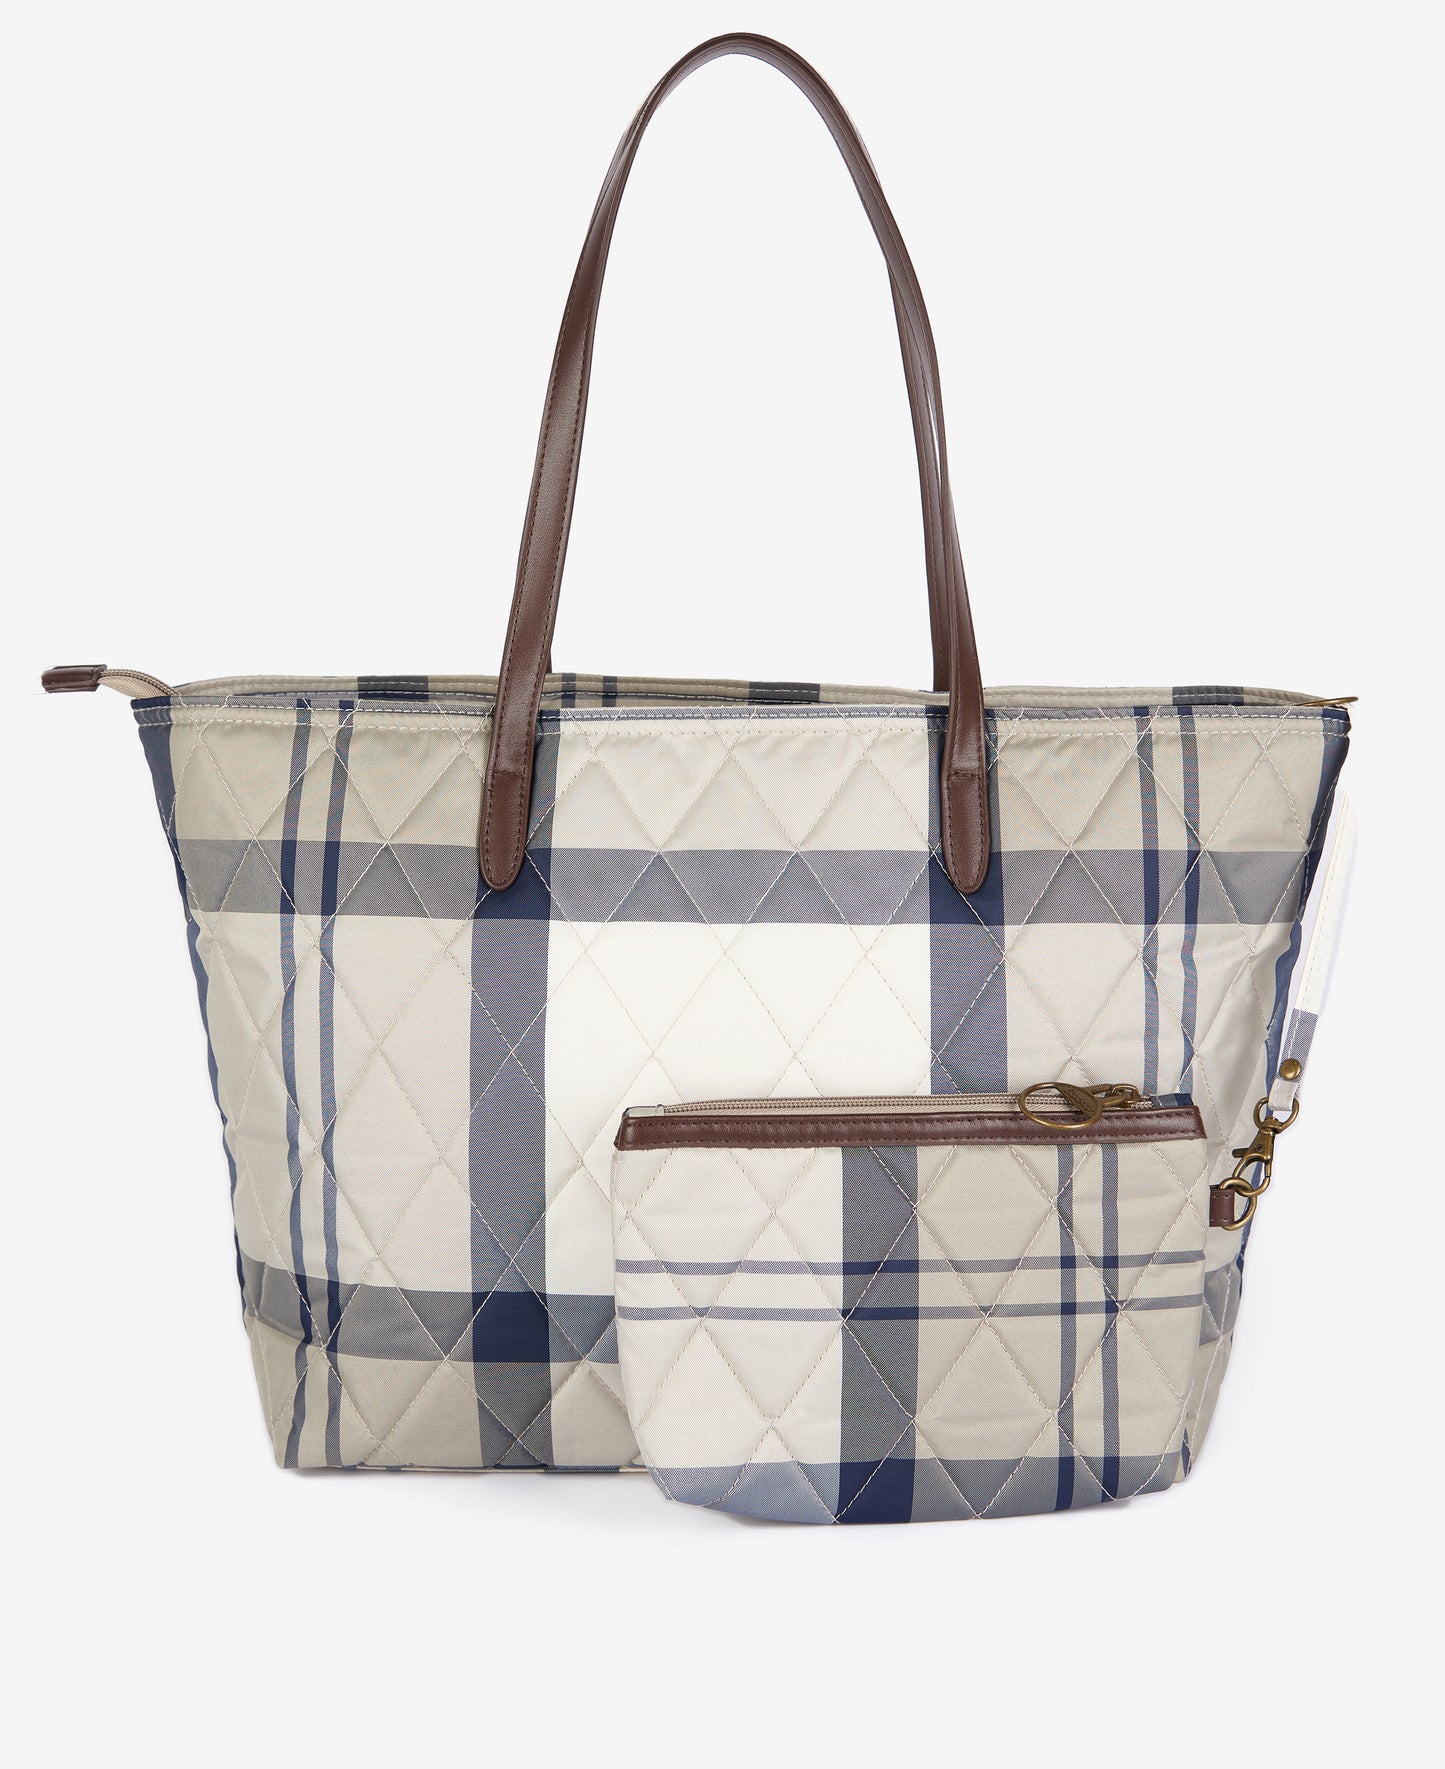 Barbour Wetherham Quilted Tartan Tote